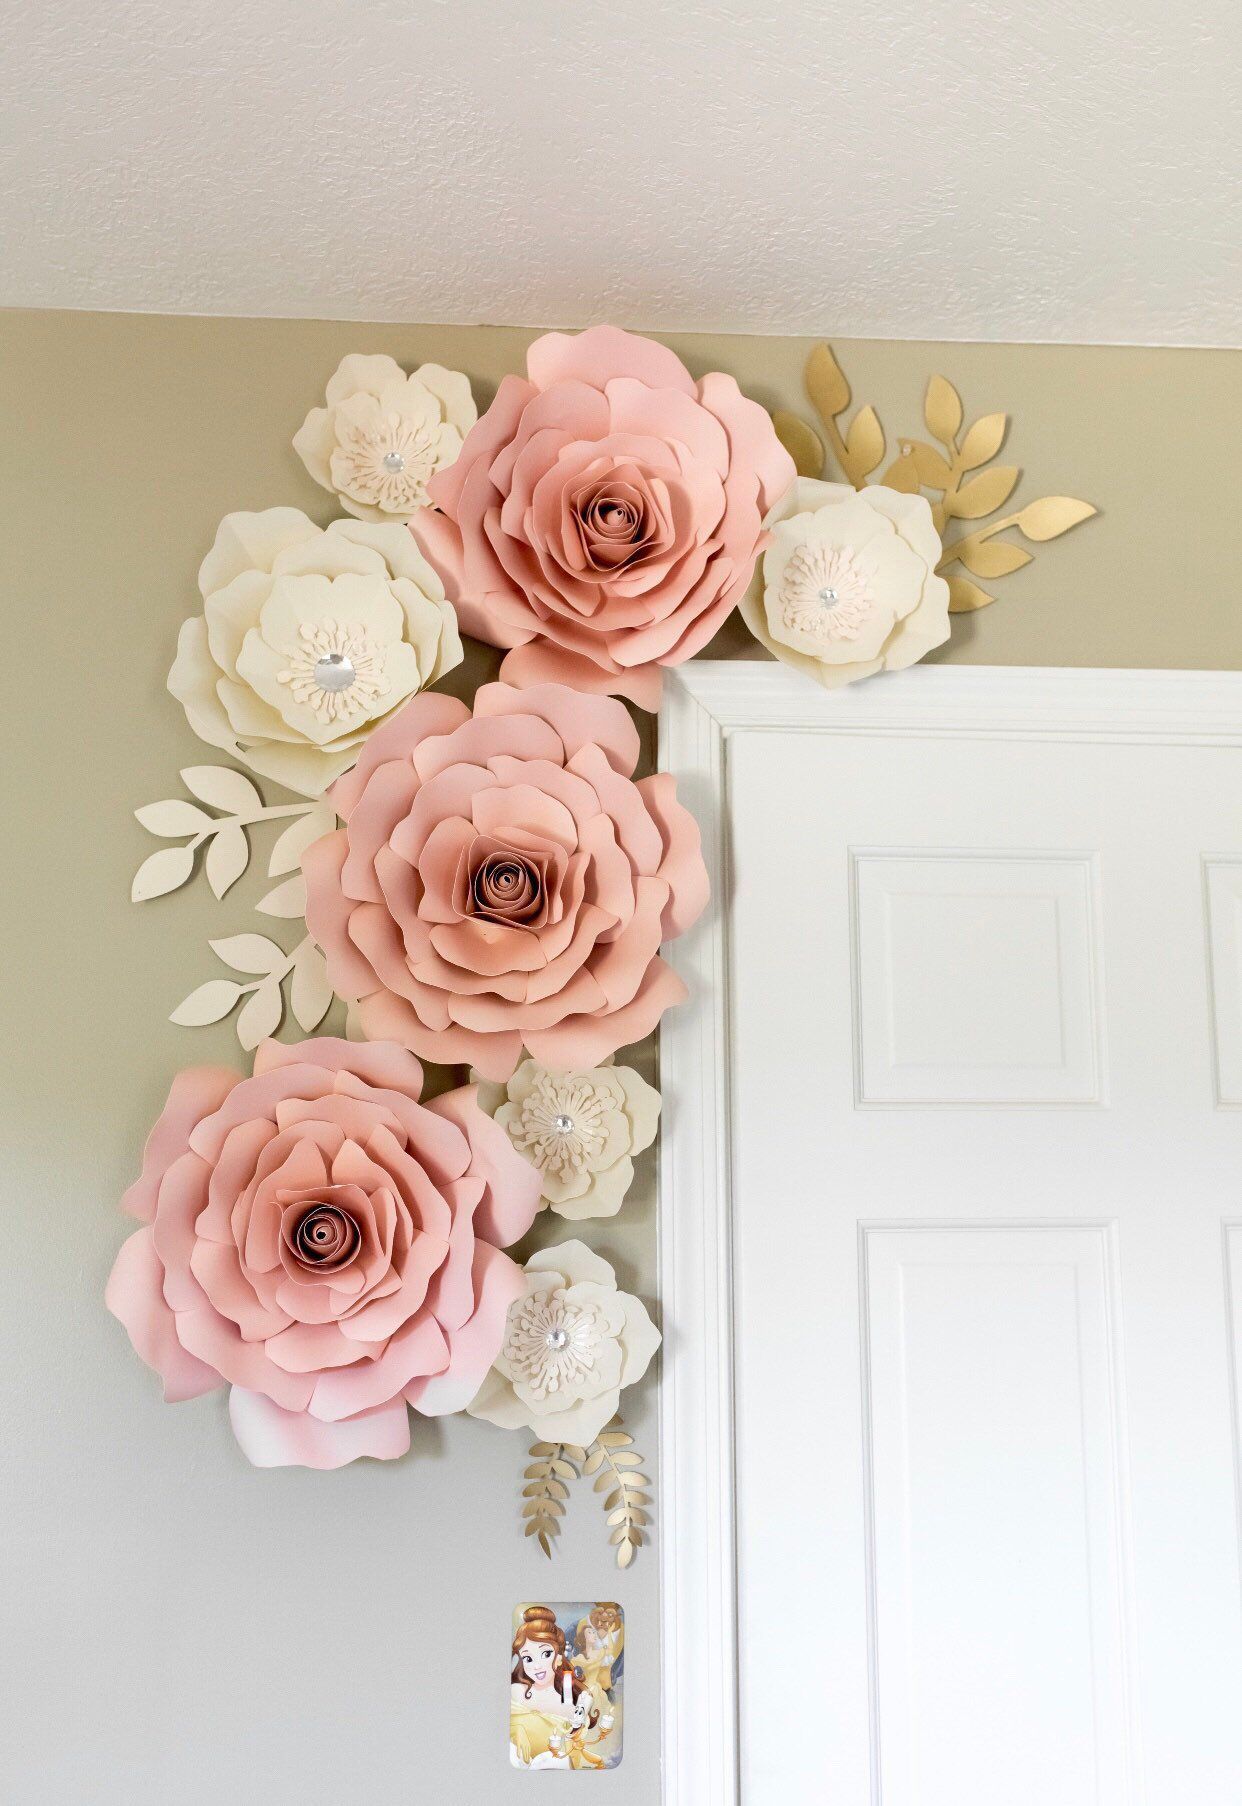 Blush and white paper flowers | paper flower wall decor | nursery wall decor | paper flower backdrop | paper flower photo backdrop party -   14 room decor Wall flowers ideas